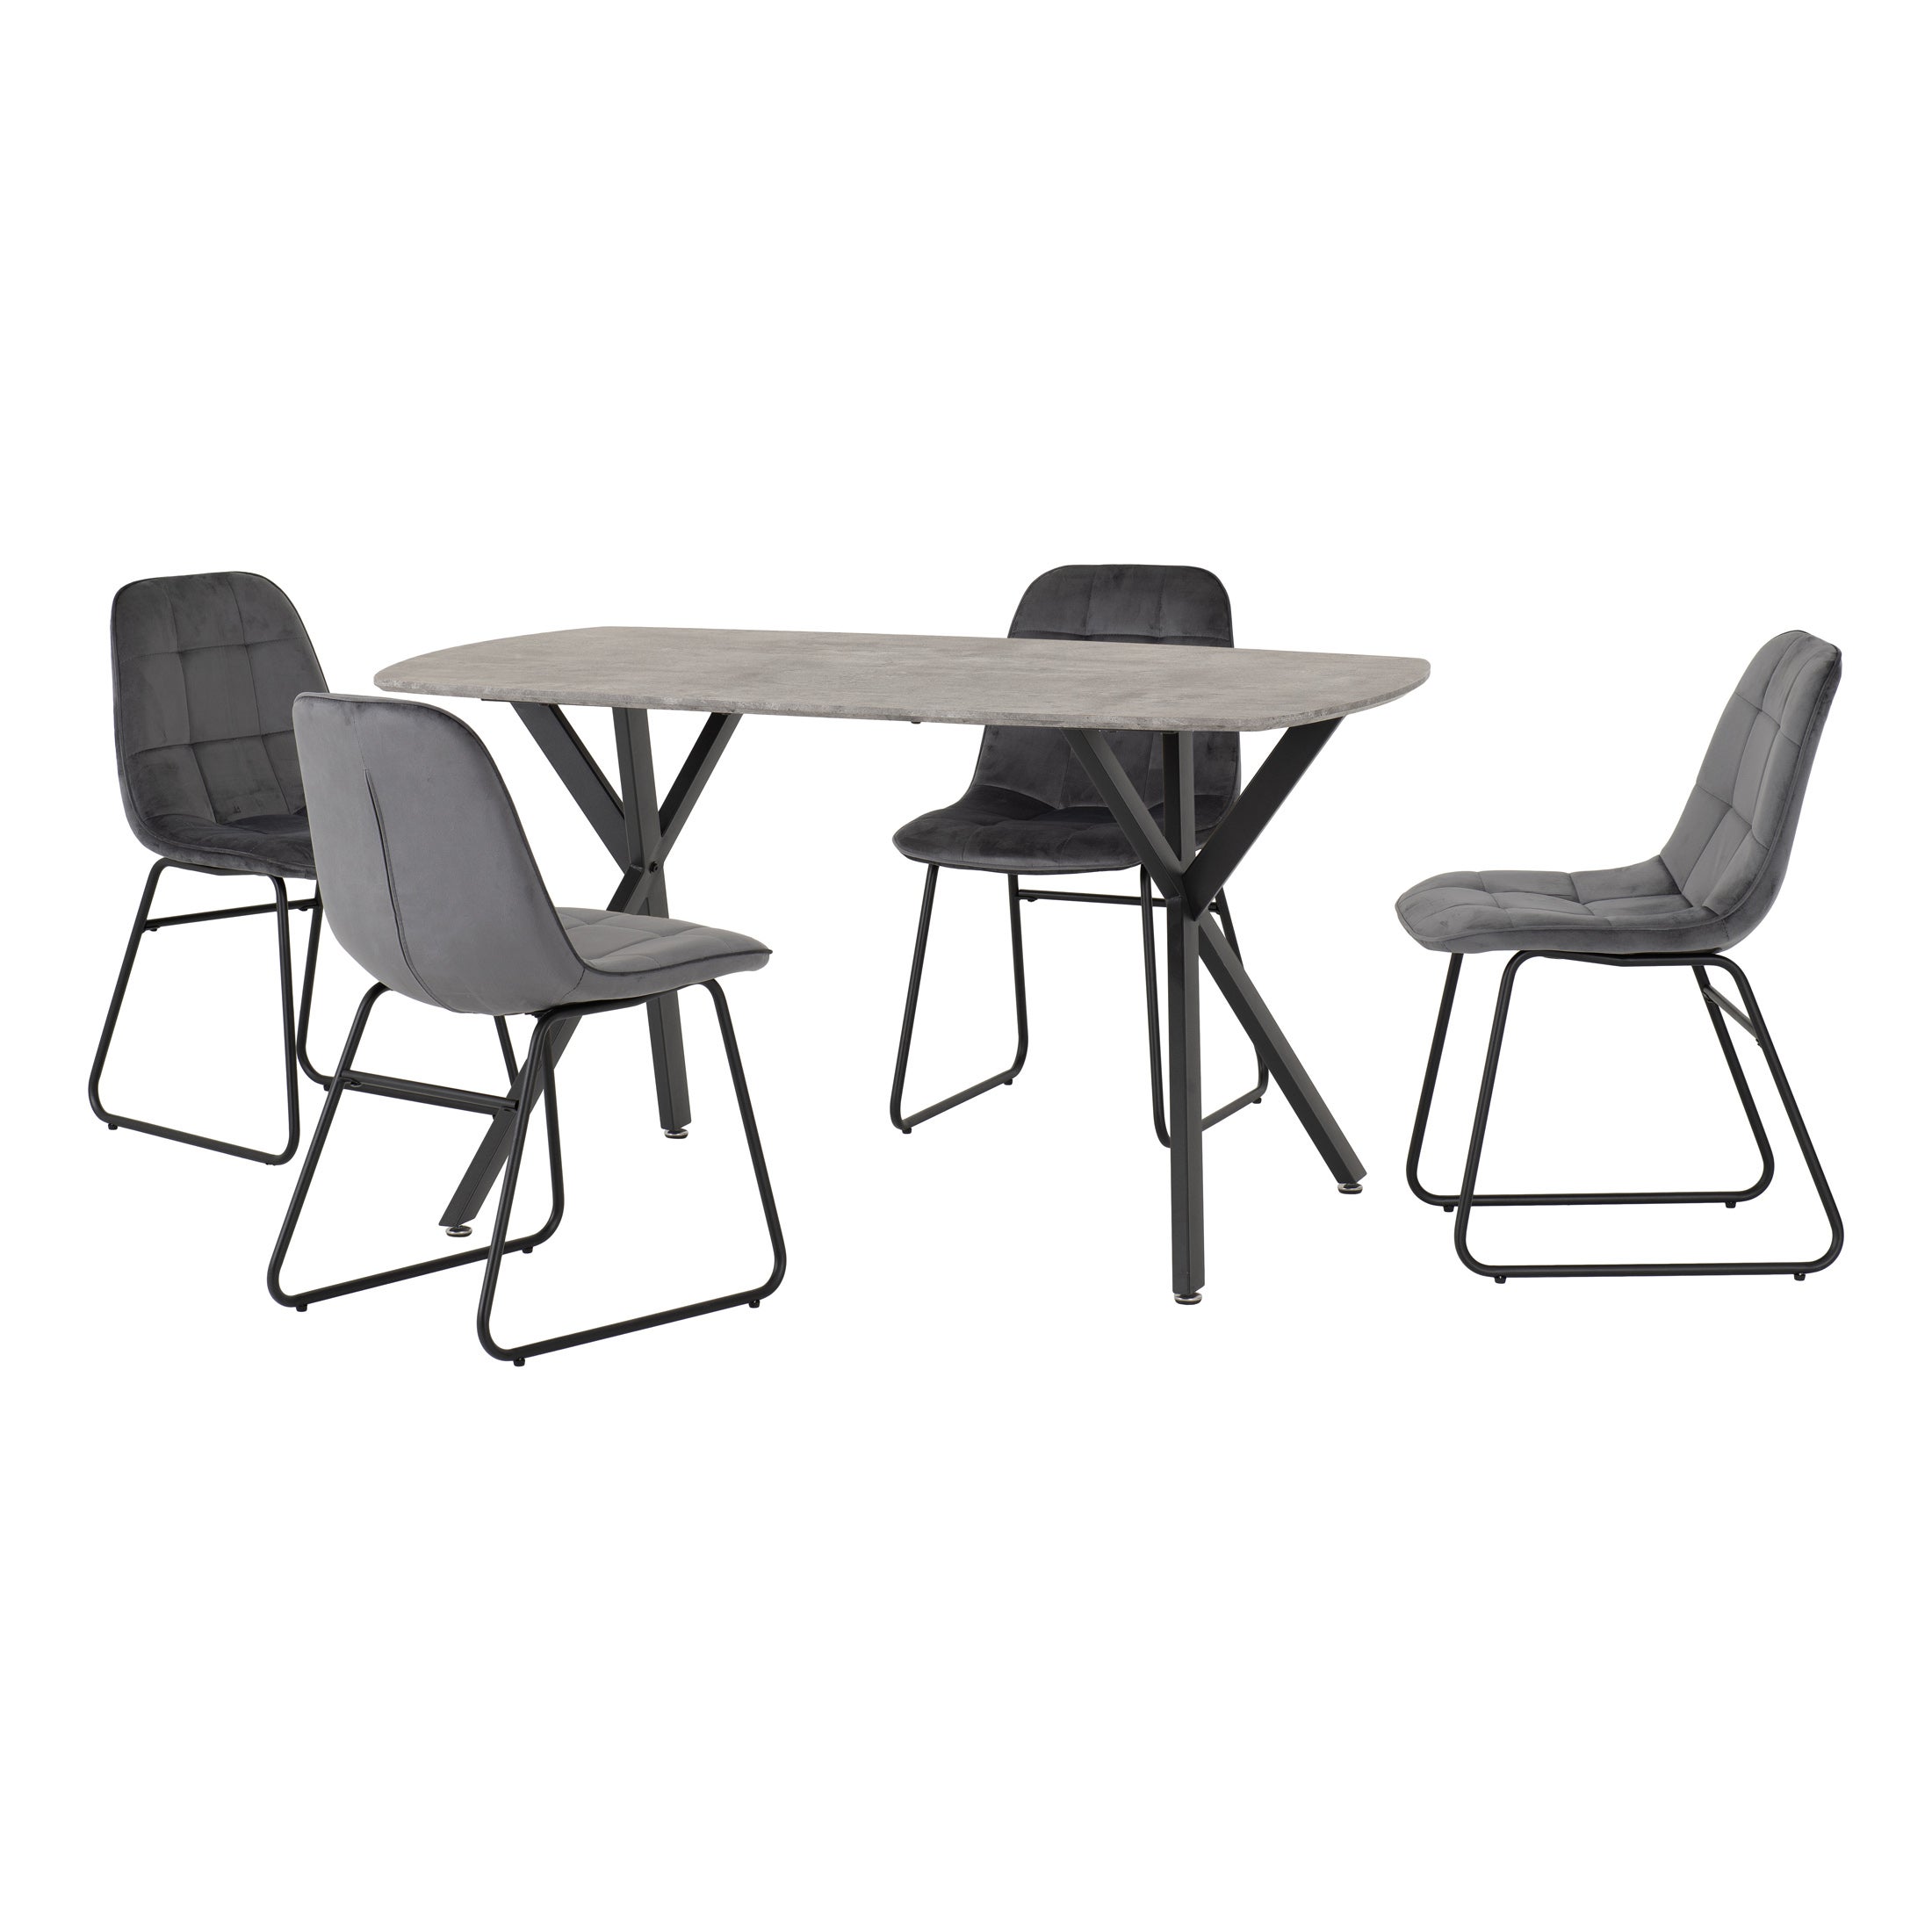 Athens Rectangular Dining Table with 4 Lukas Chairs, Concrete Effect Grey